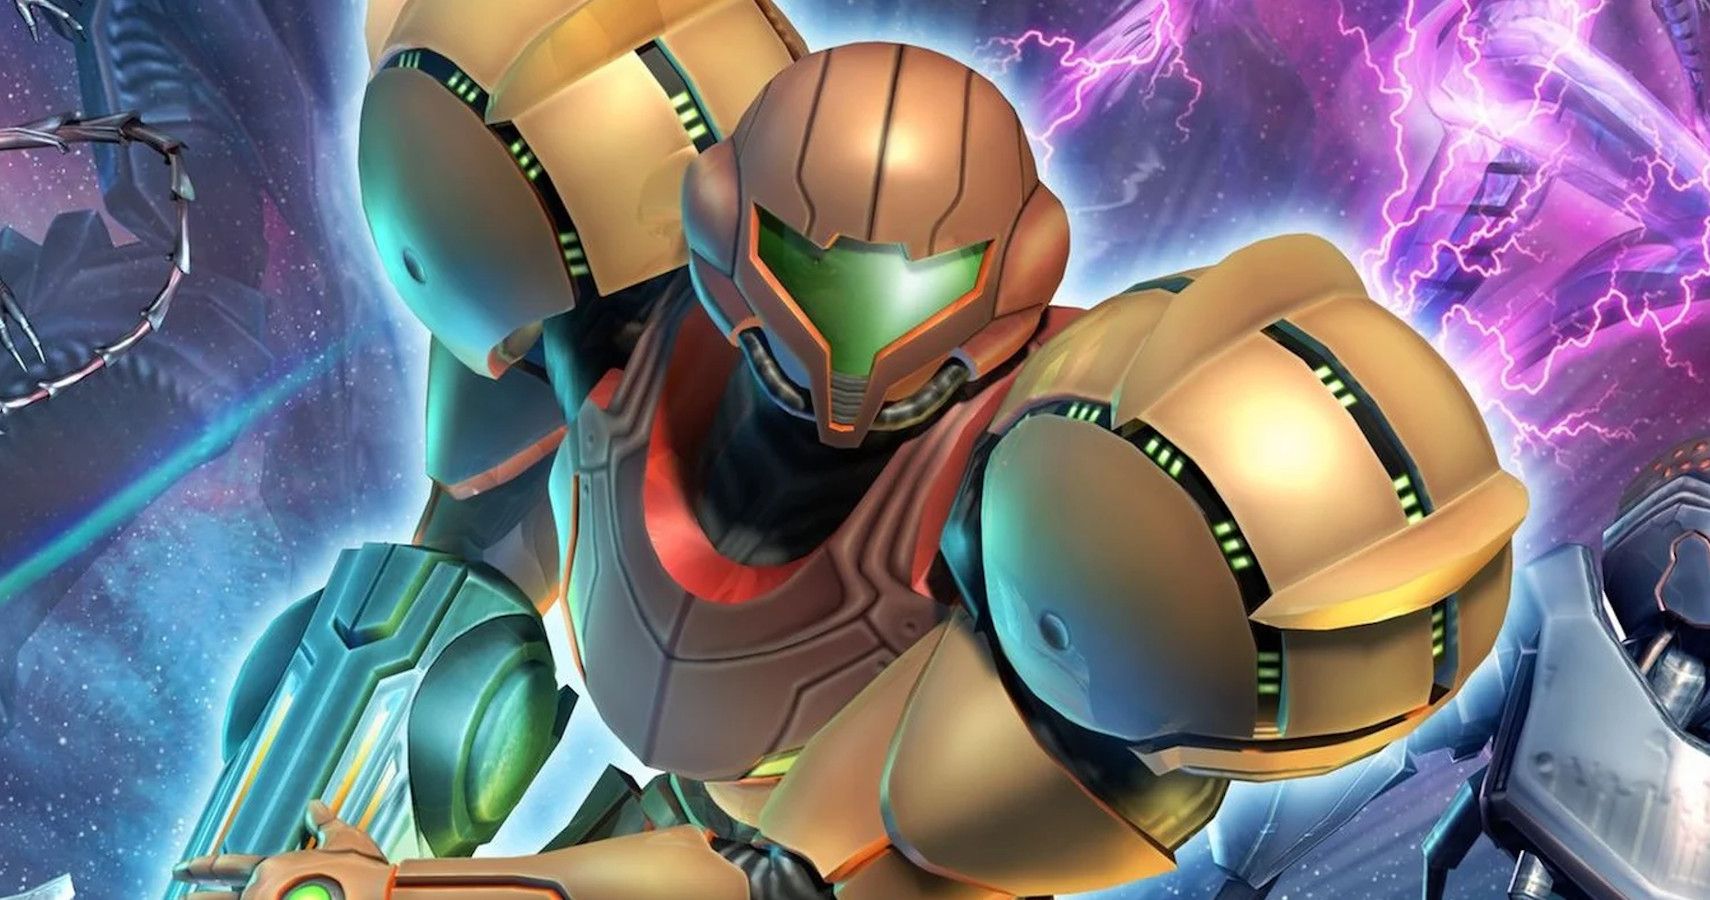 Retailer Lists Metroid Prime Trilogy For June Release Date